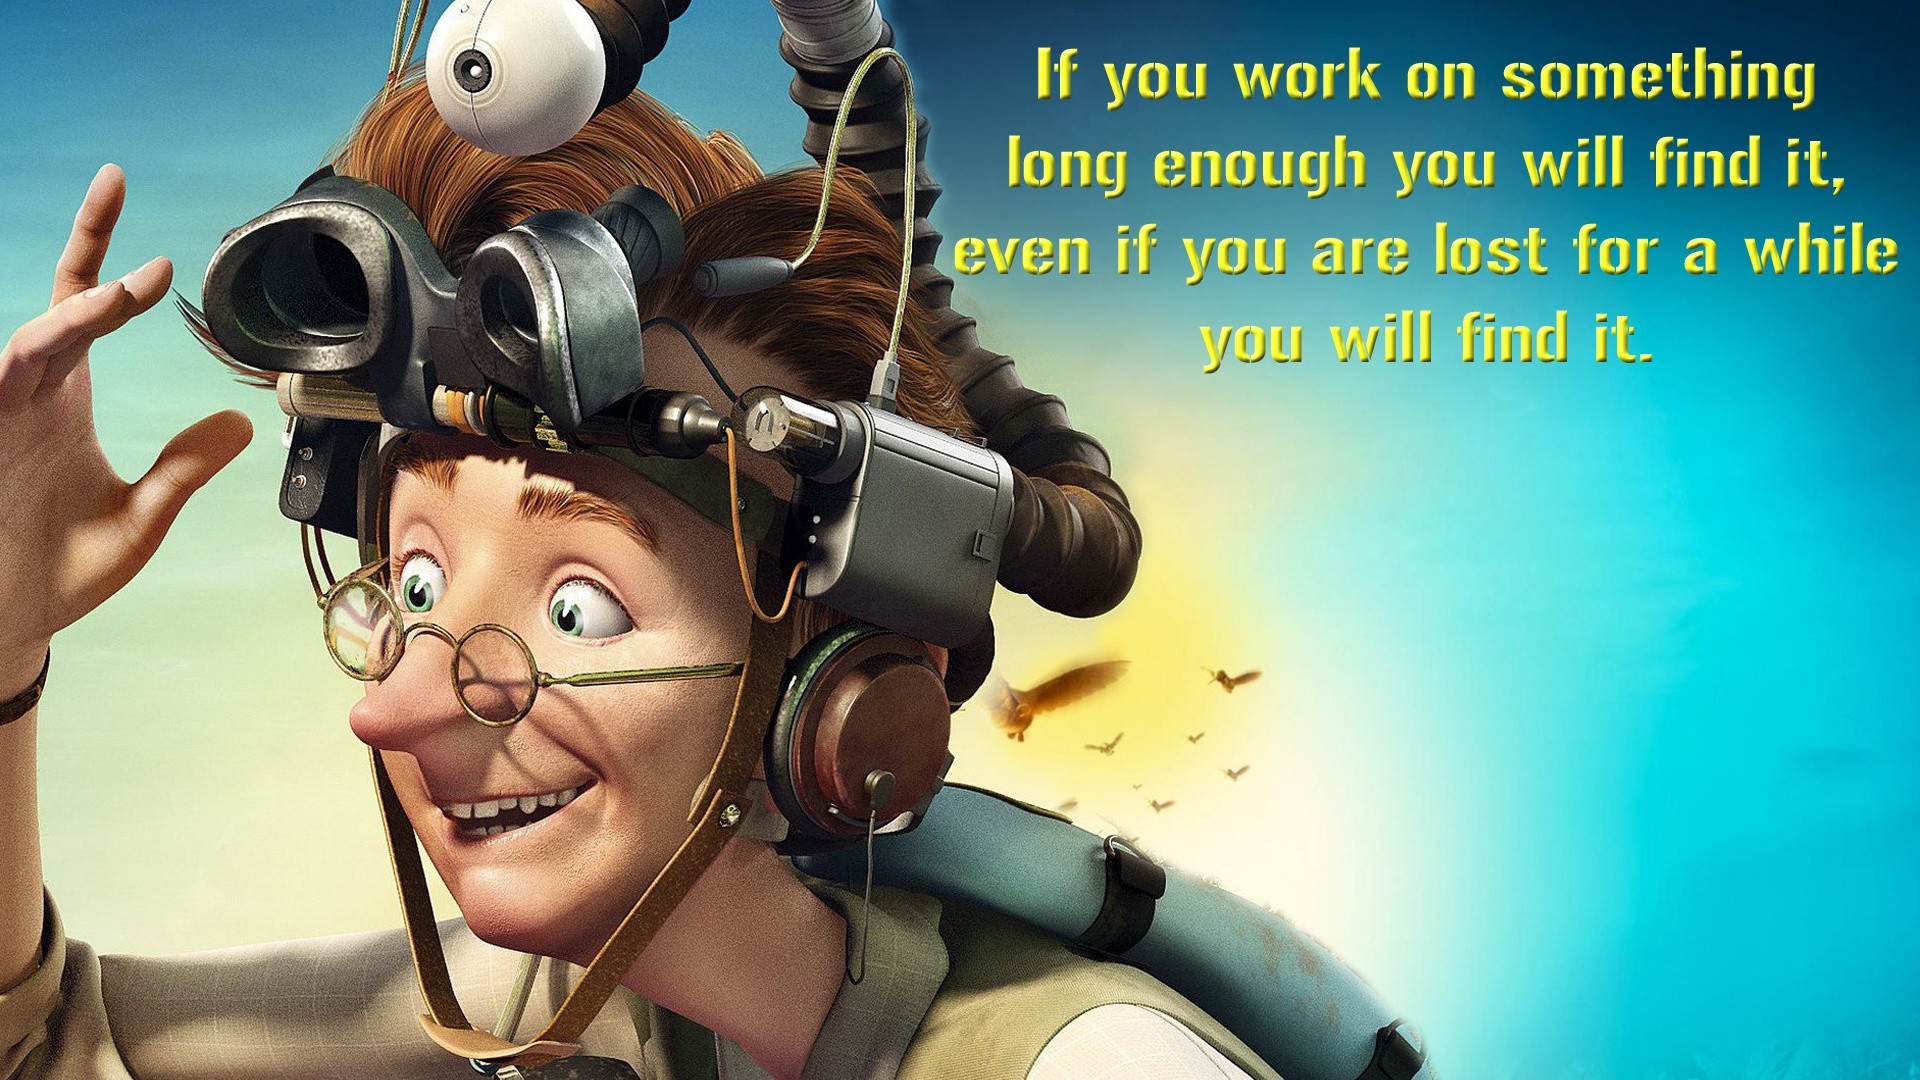 Motivational Quotes From Movies
 20 Inspiring Quotes From Animated Movies